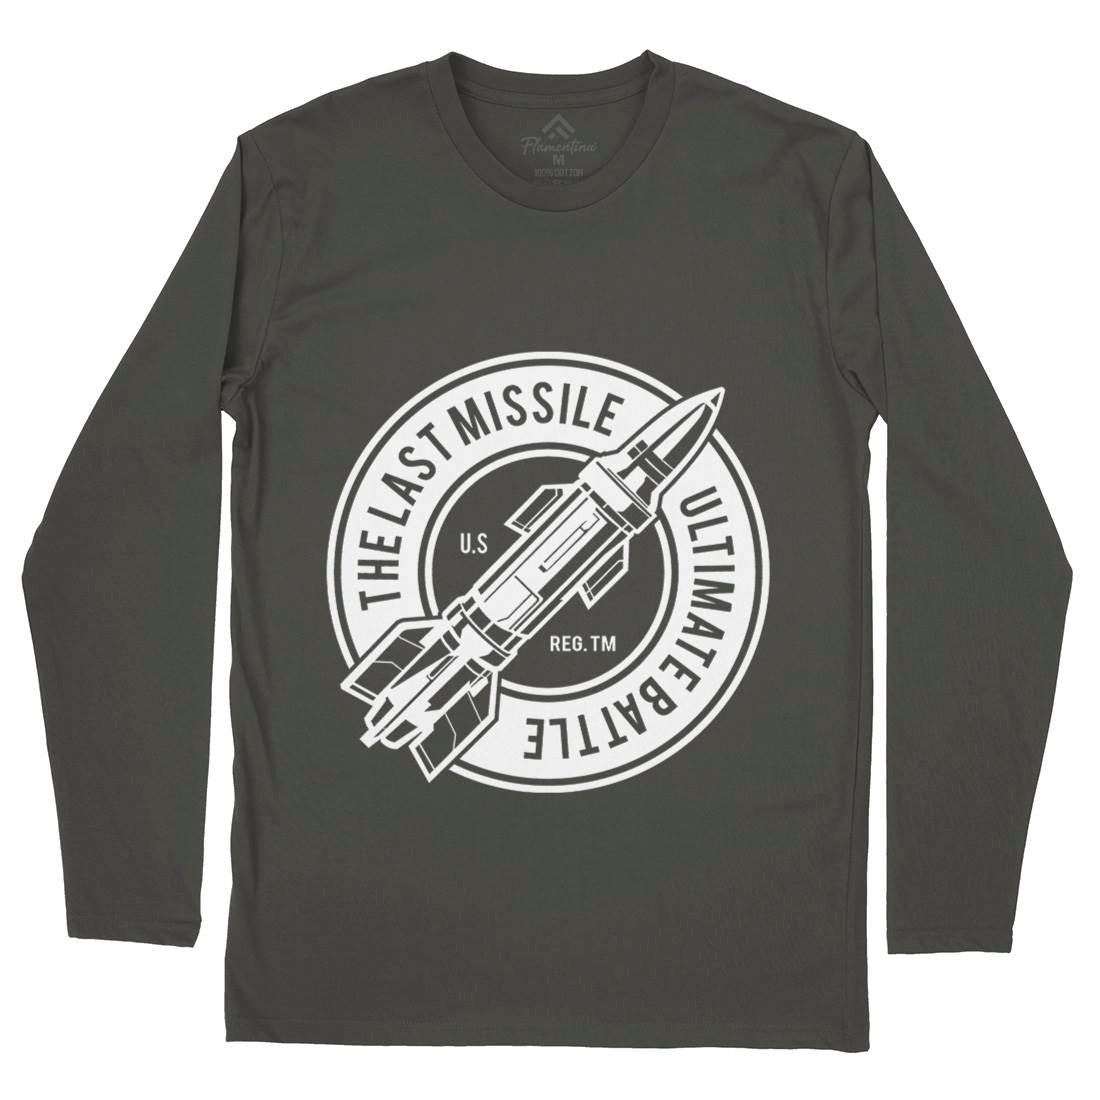 Last Missile Mens Long Sleeve T-Shirt Army A175